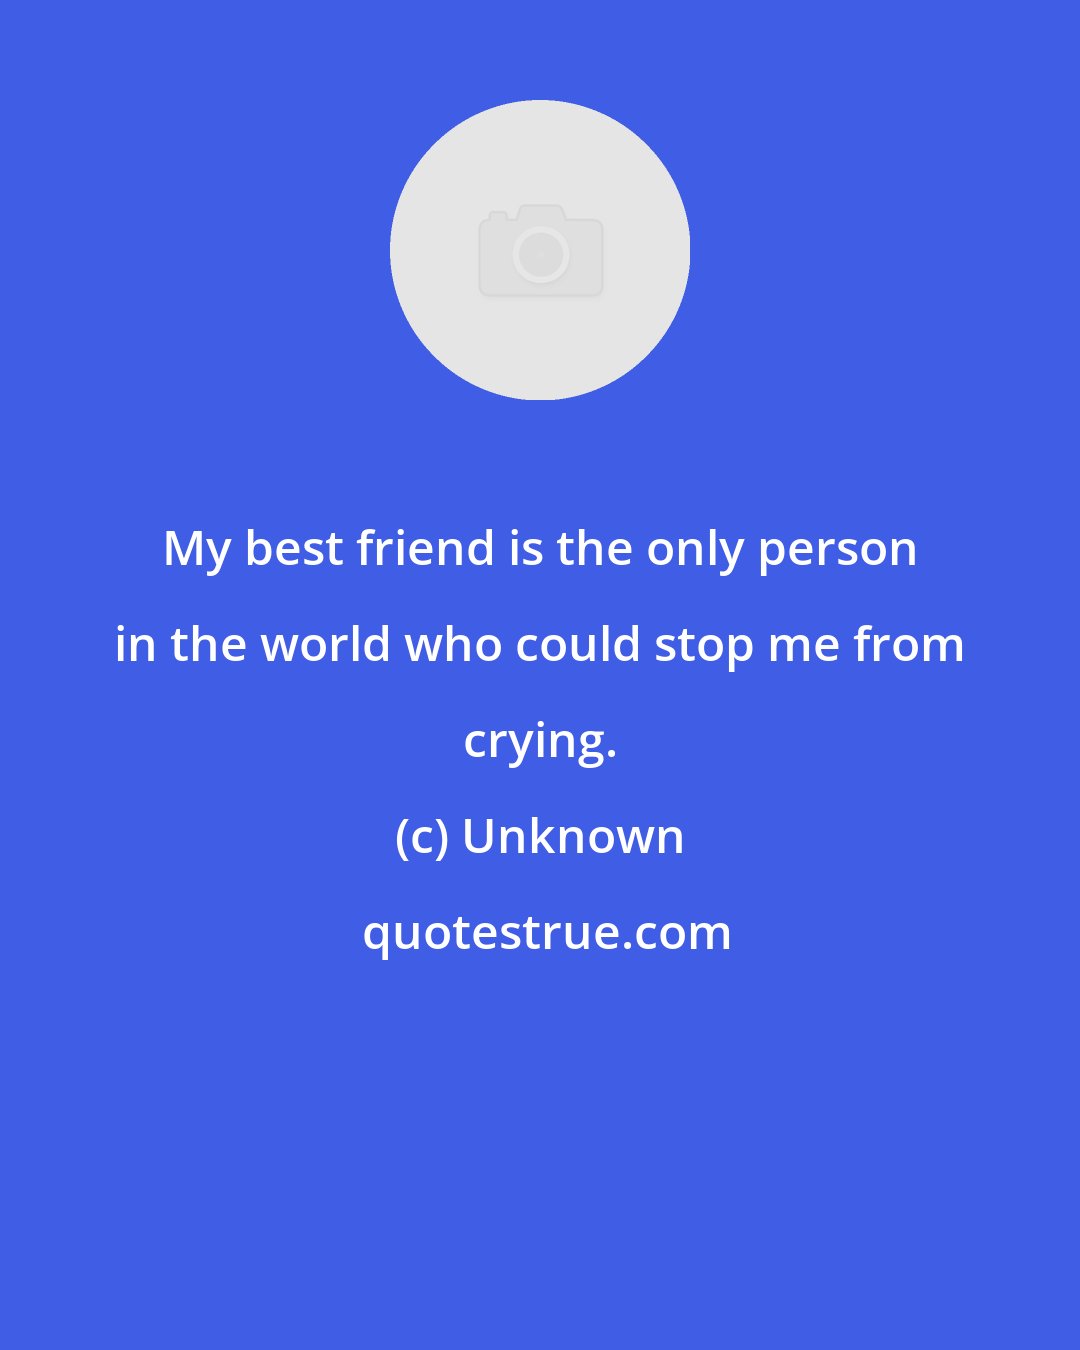 Unknown: My best friend is the only person in the world who could stop me from crying.